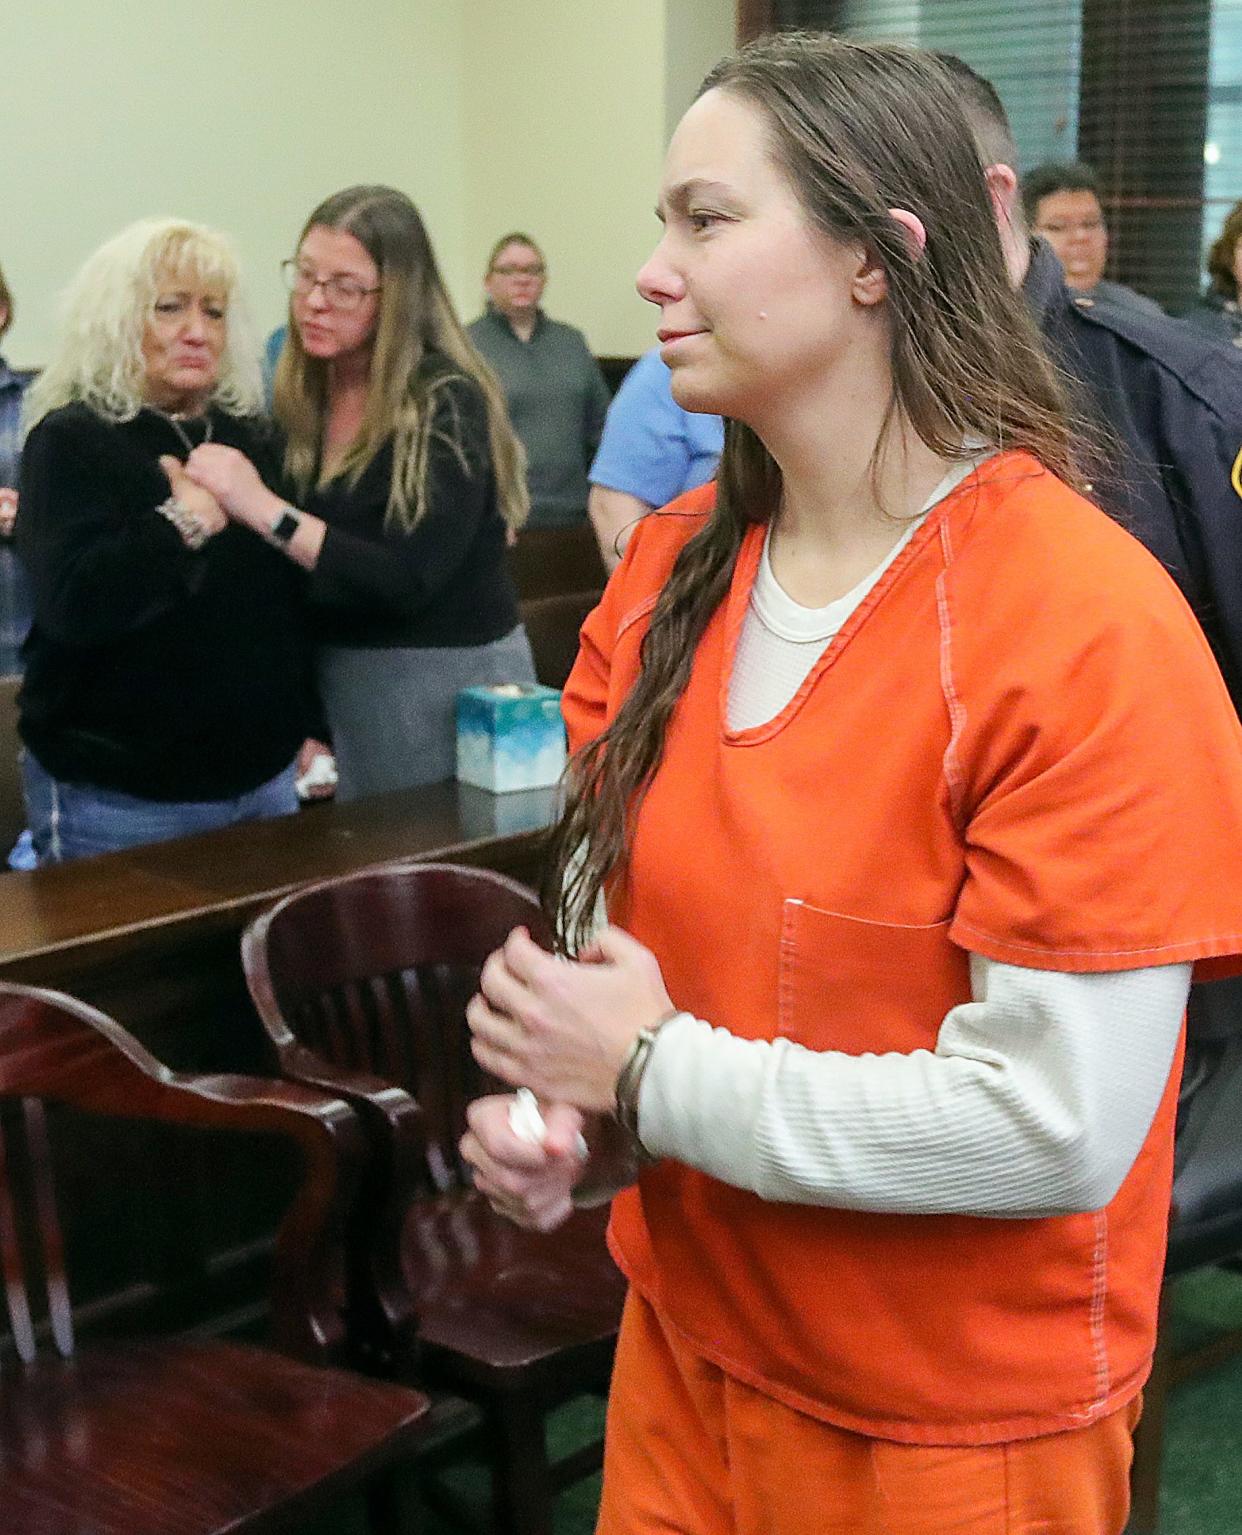 Kim Biggs, left, the mother of Ashley Biggs, is comforted by Summit County victim advocate Katie Thompson while Erica Stefanko is escorted away after being sentenced to life in prison with a possible parole after 30 years for her role in the 2012 murder of Ashley Biggs on Thursday in Akron.